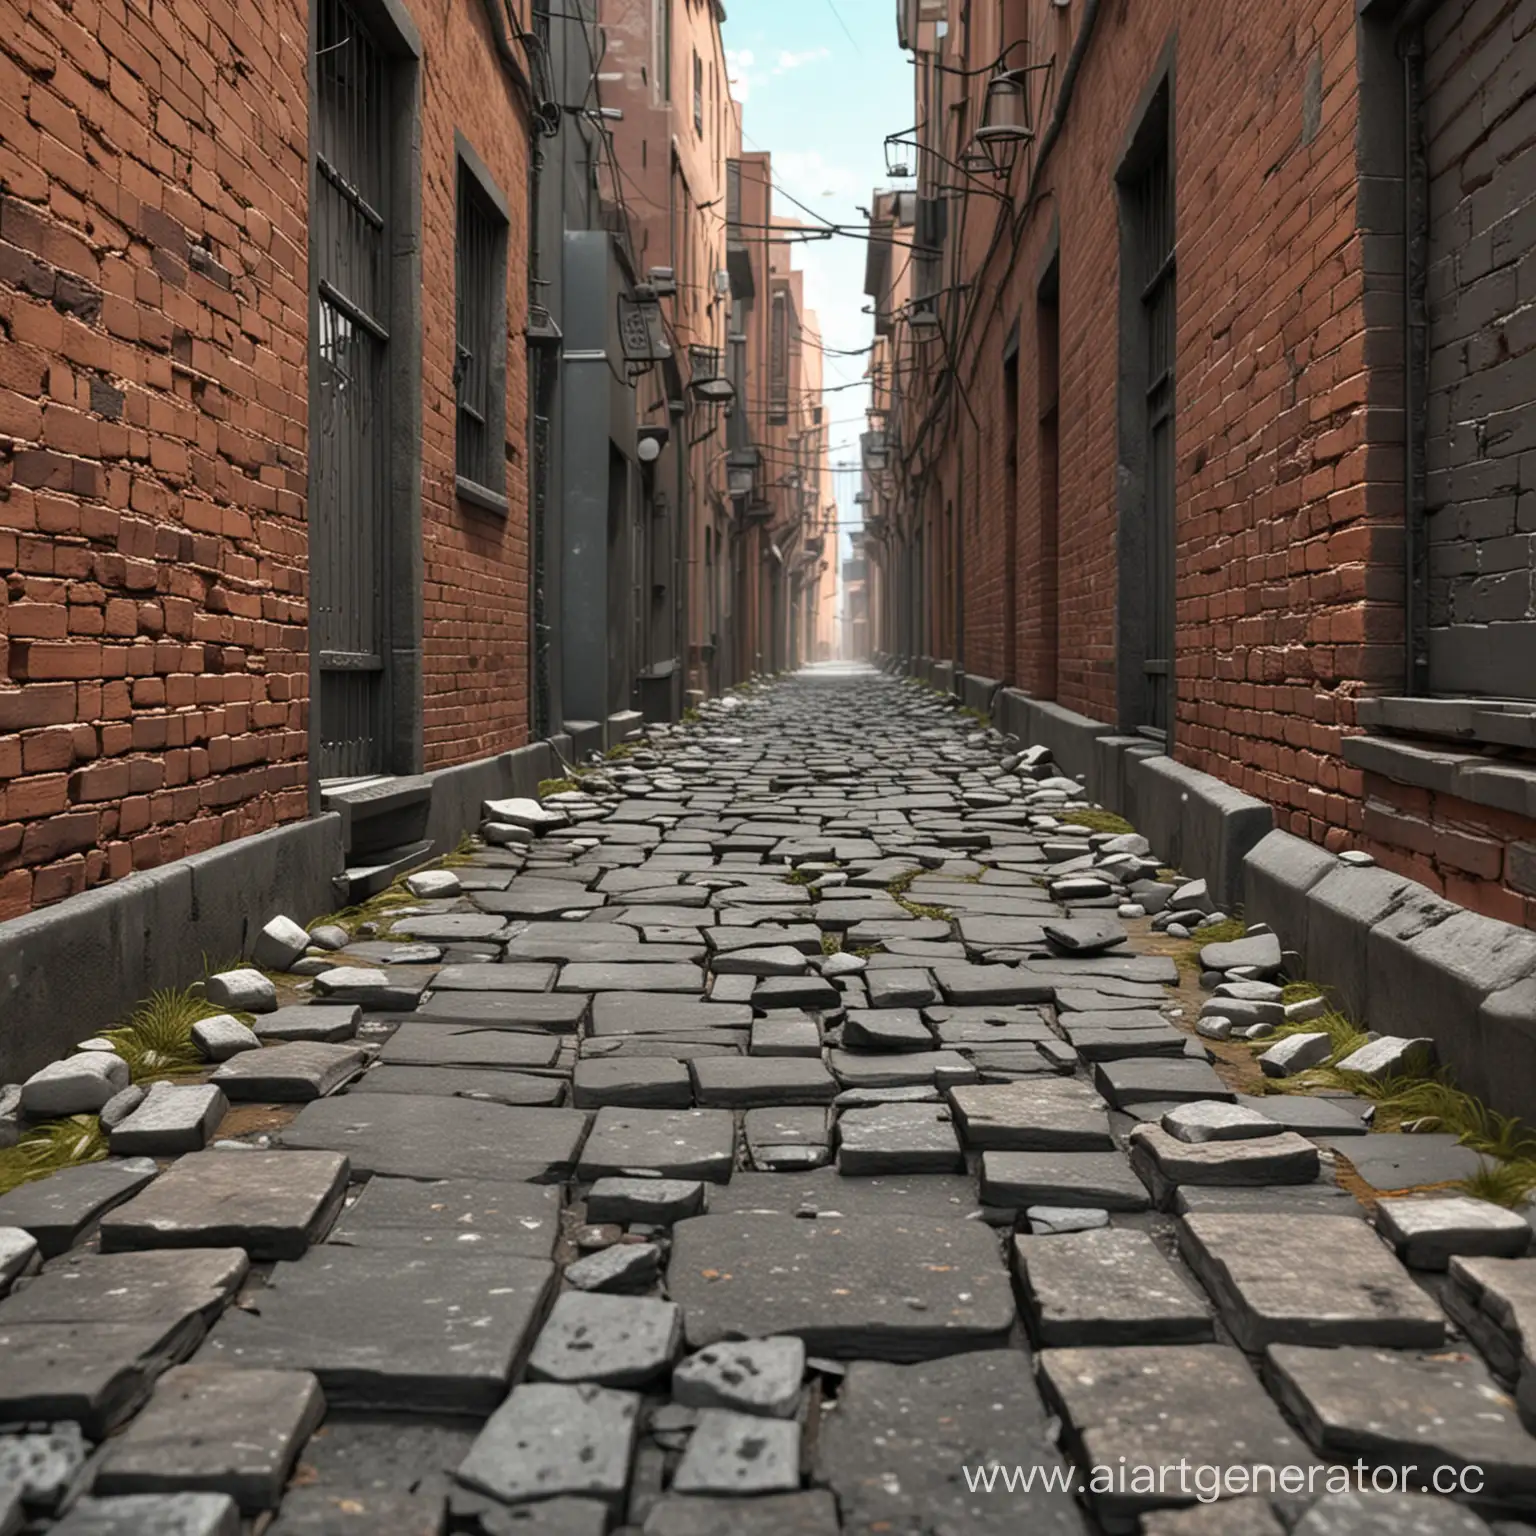 Colorful-Cartoon-Alley-with-Cracked-Pavement-3D-Perspective